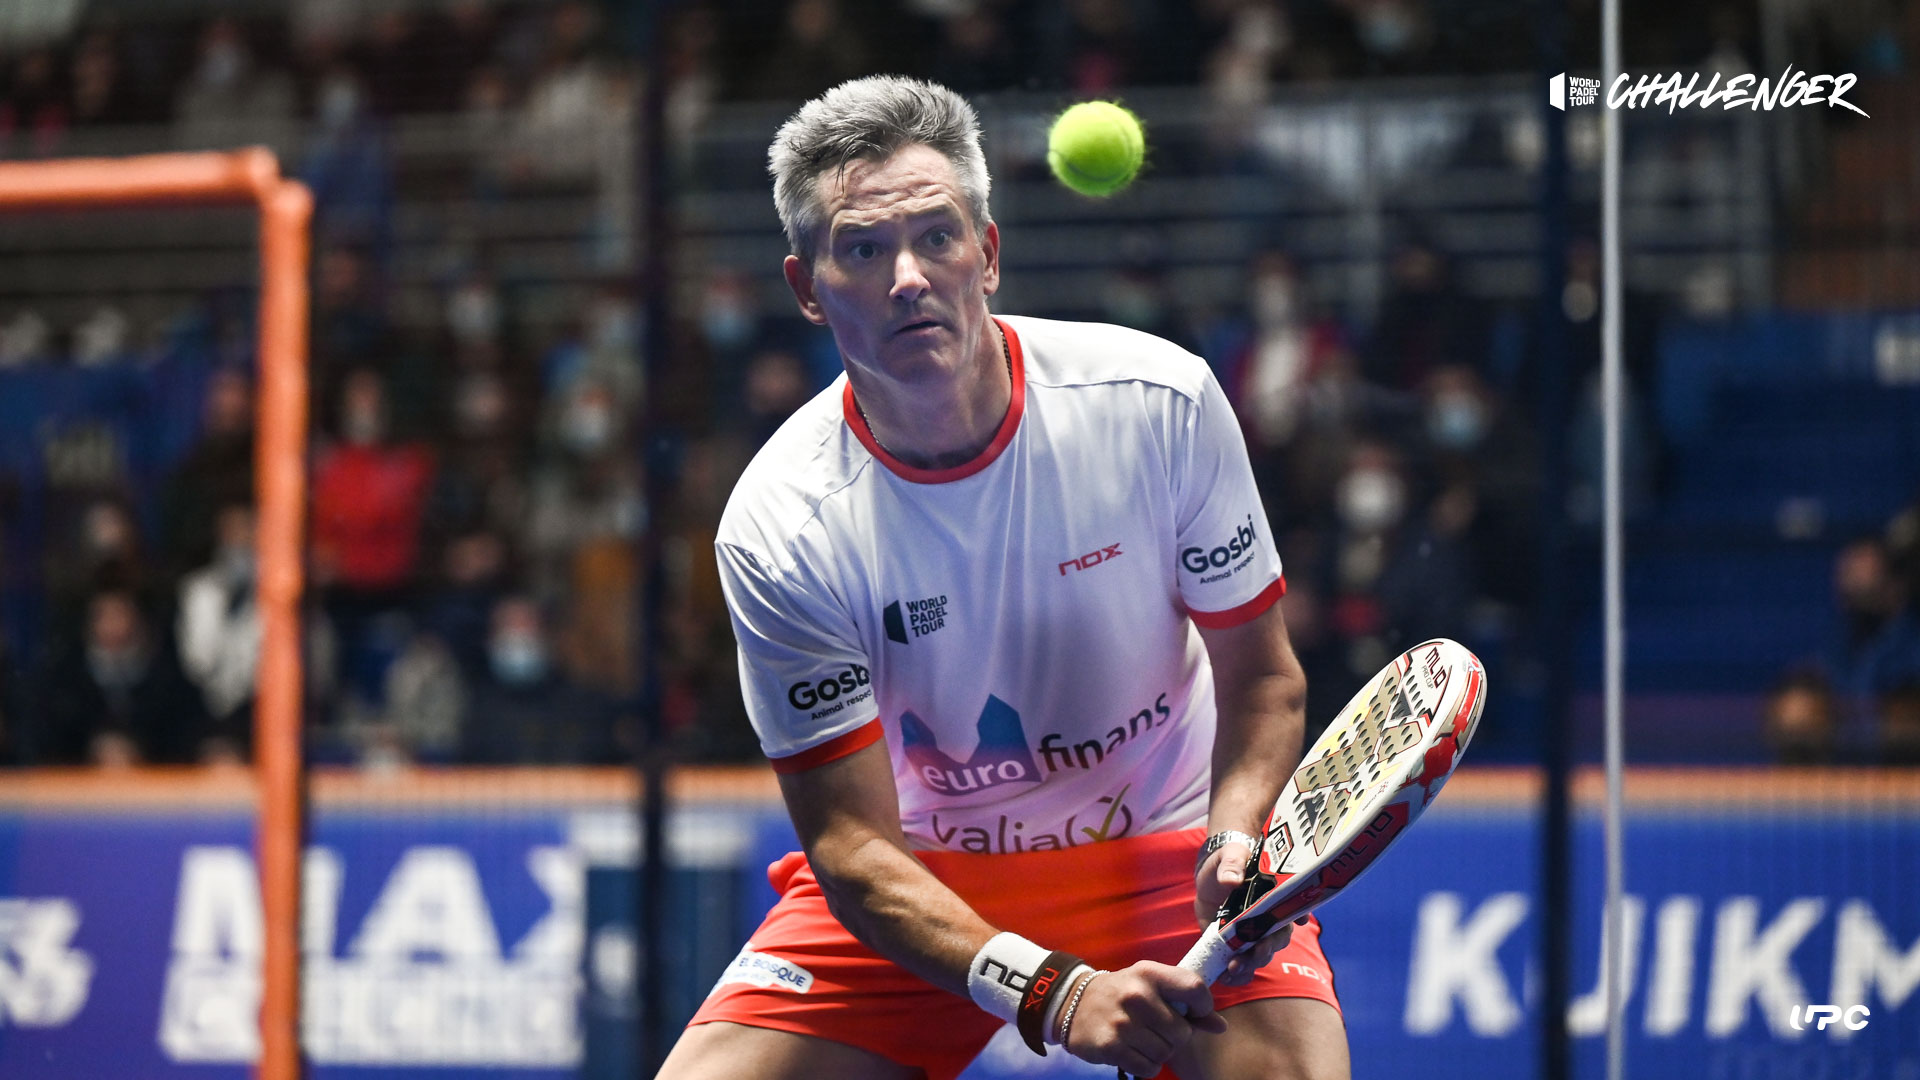 Tactical padel : forehand or backhand window exit?